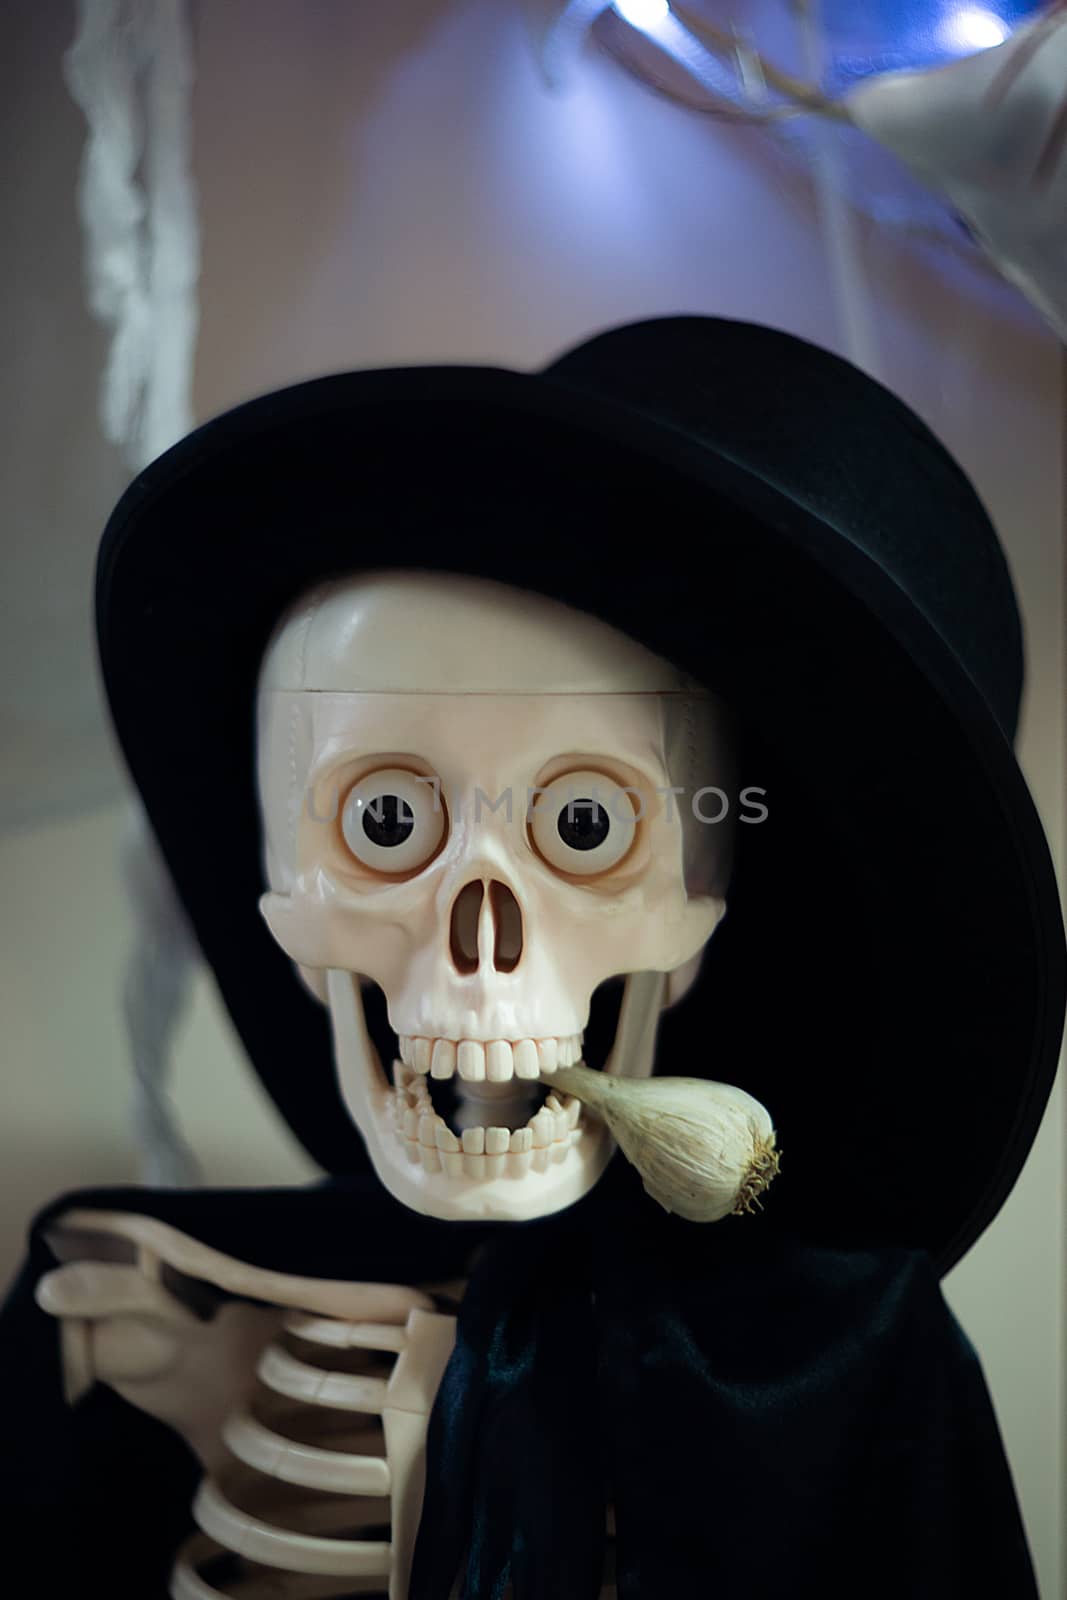 Skeleton with hat on head and cloak with garlic in mouth. Halloween decoration. Close-up view with blurred background.